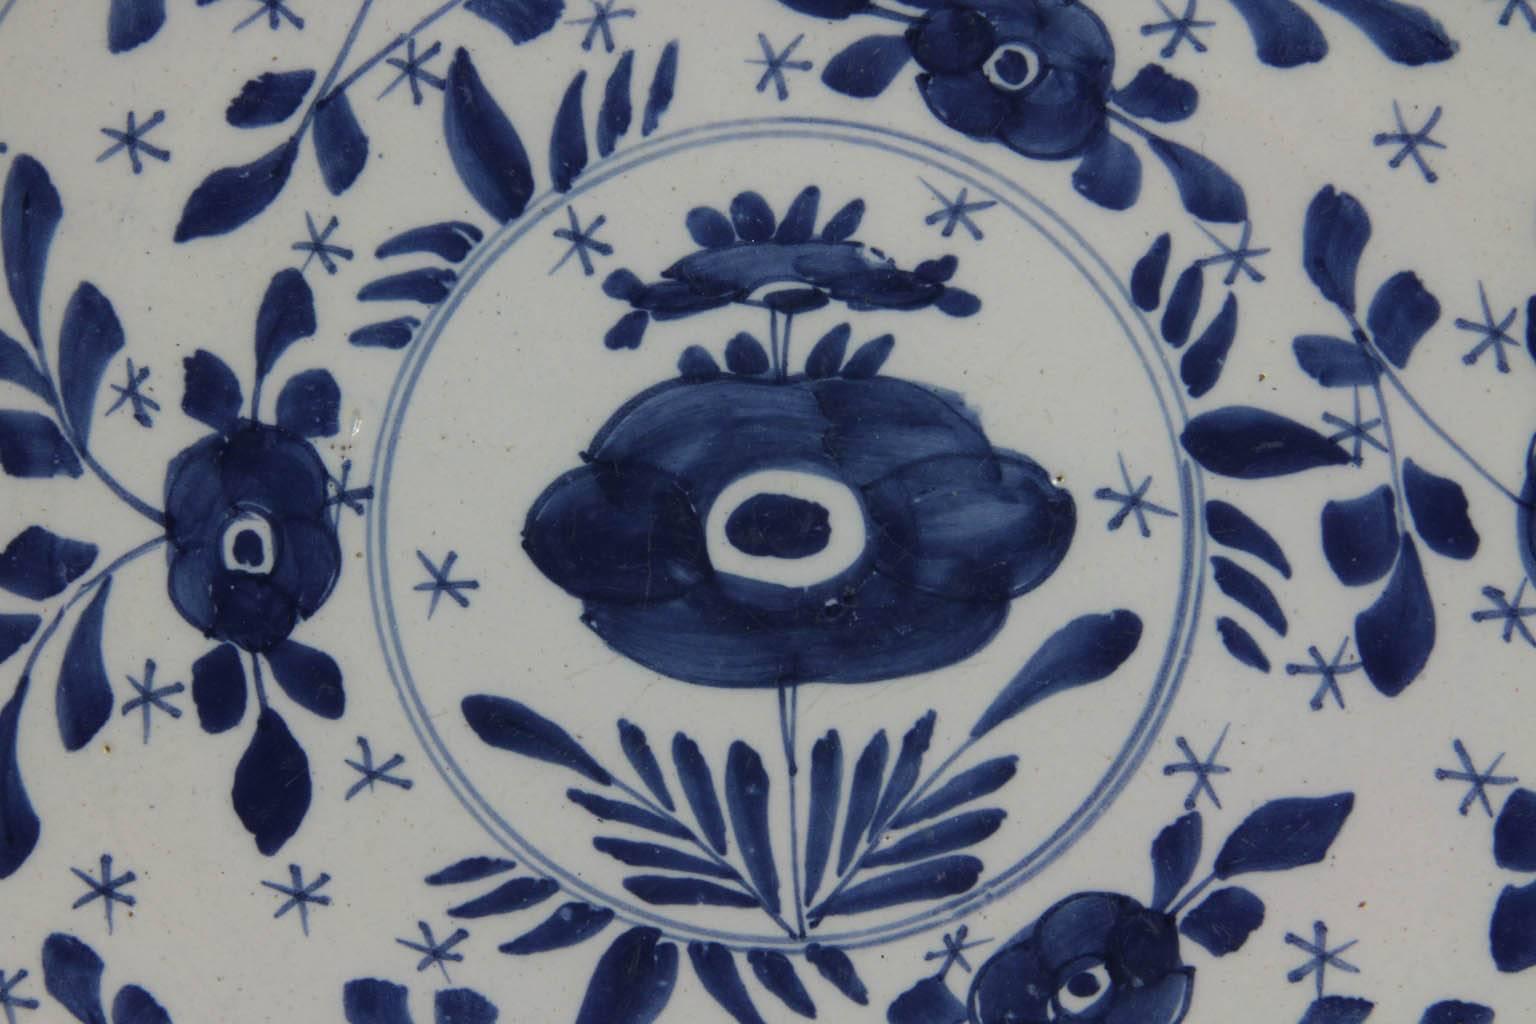 Large delft blue and white plate with central flower and surrounded by small flowers and leaves.